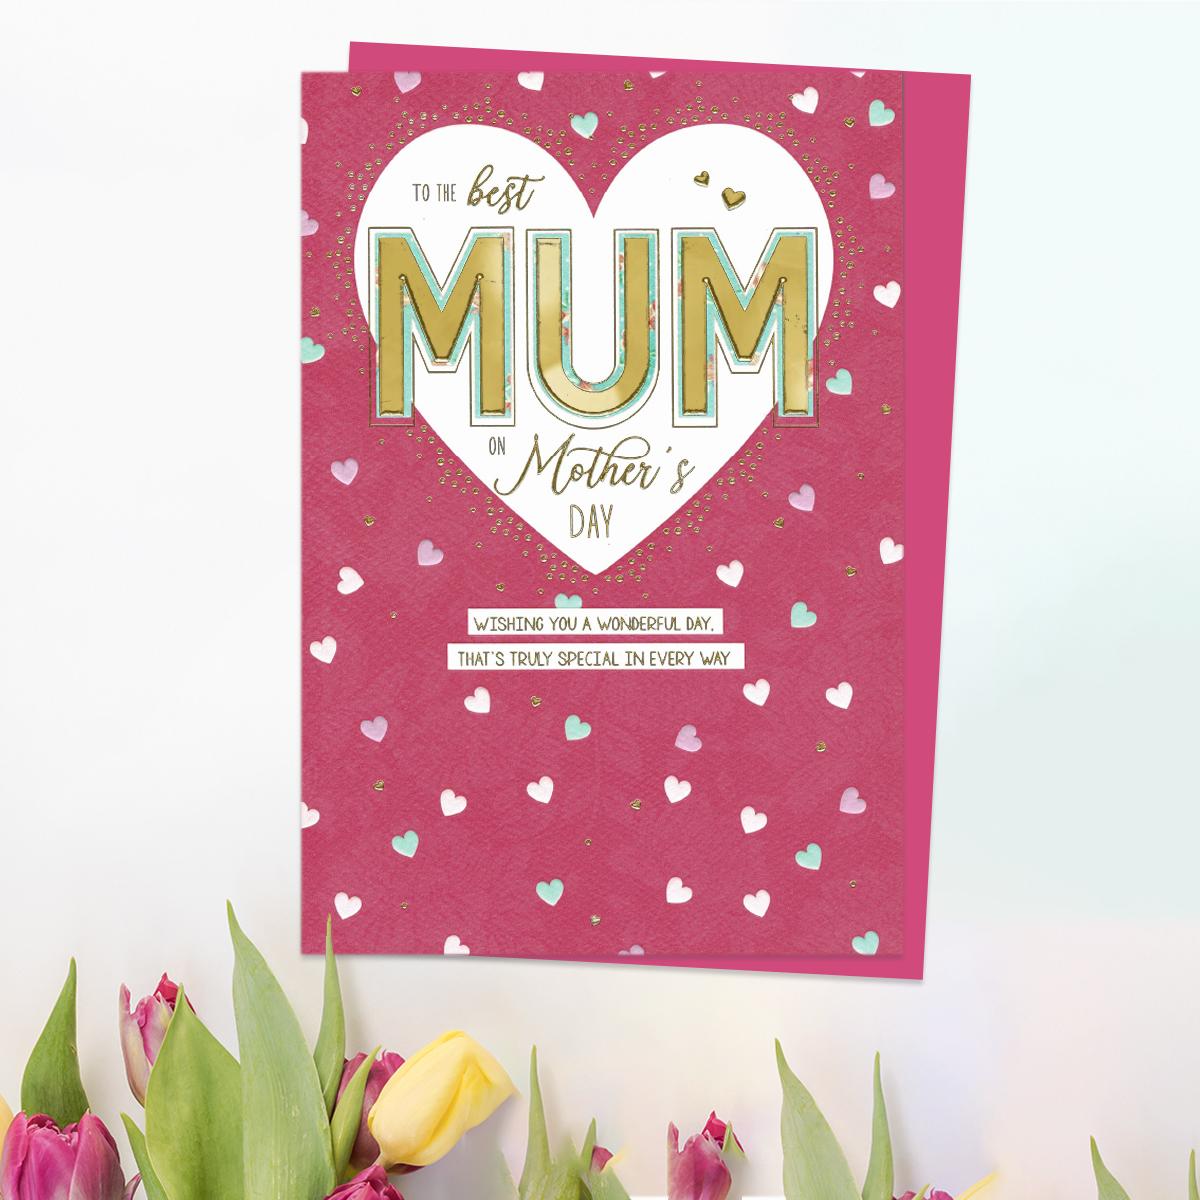 ' To The Best Mum On Mother's Day' Card With Added Gold Foiling Detail And Cerise Envelope